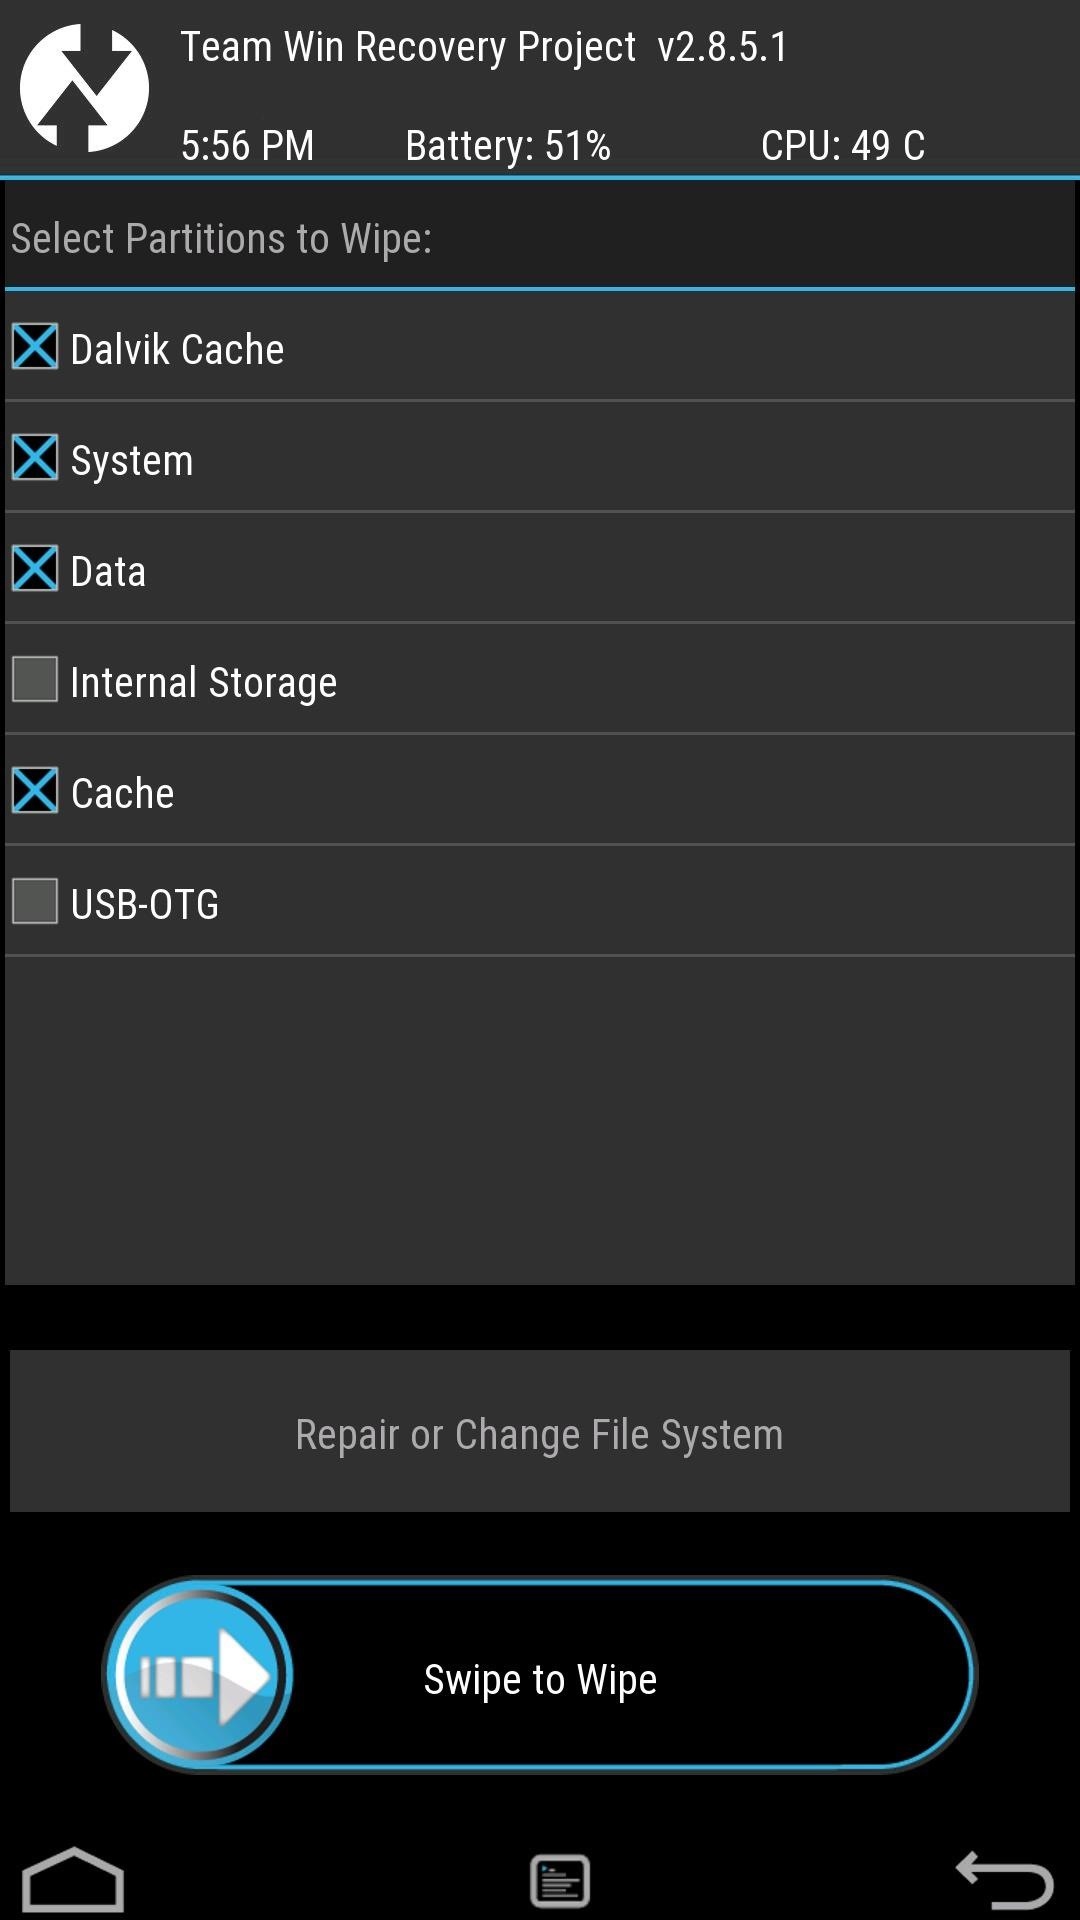 How to Install Cyanogen OS 12 on Your OnePlus One